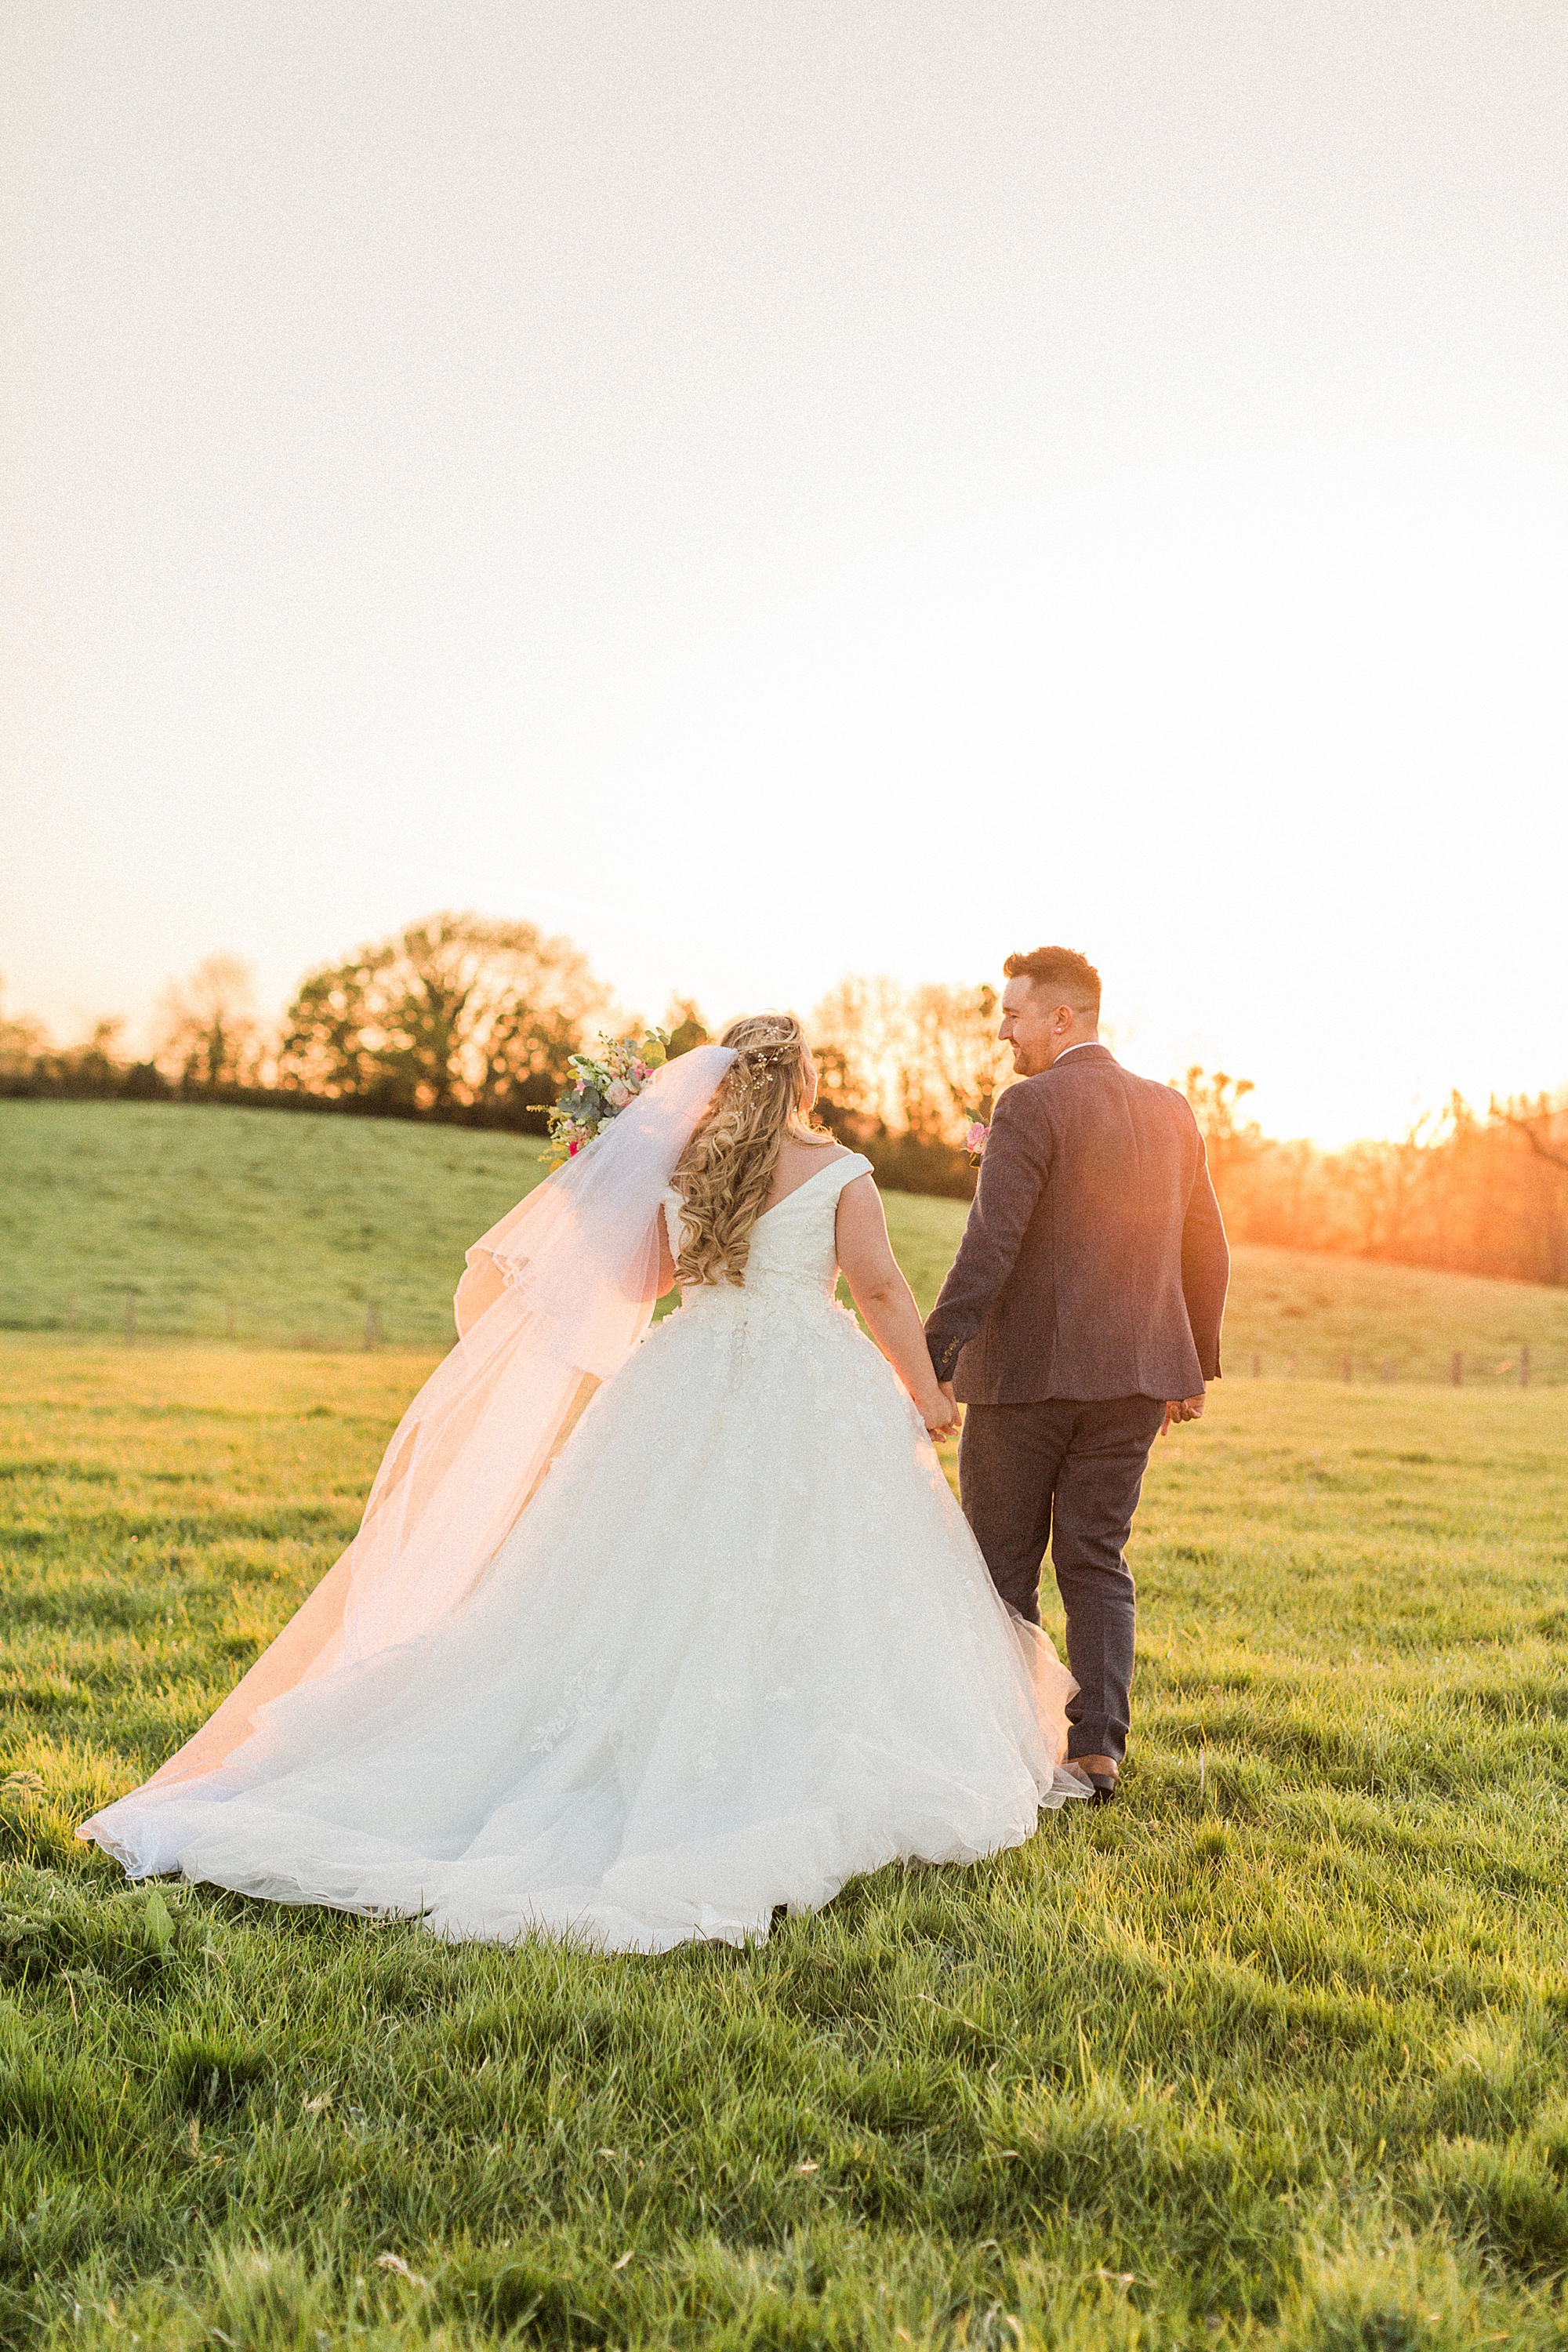 photo shows a bride and groom walking away from the camera into the sunset, holding hands and the groom is looking towards his wife. They're in a field during golden hour